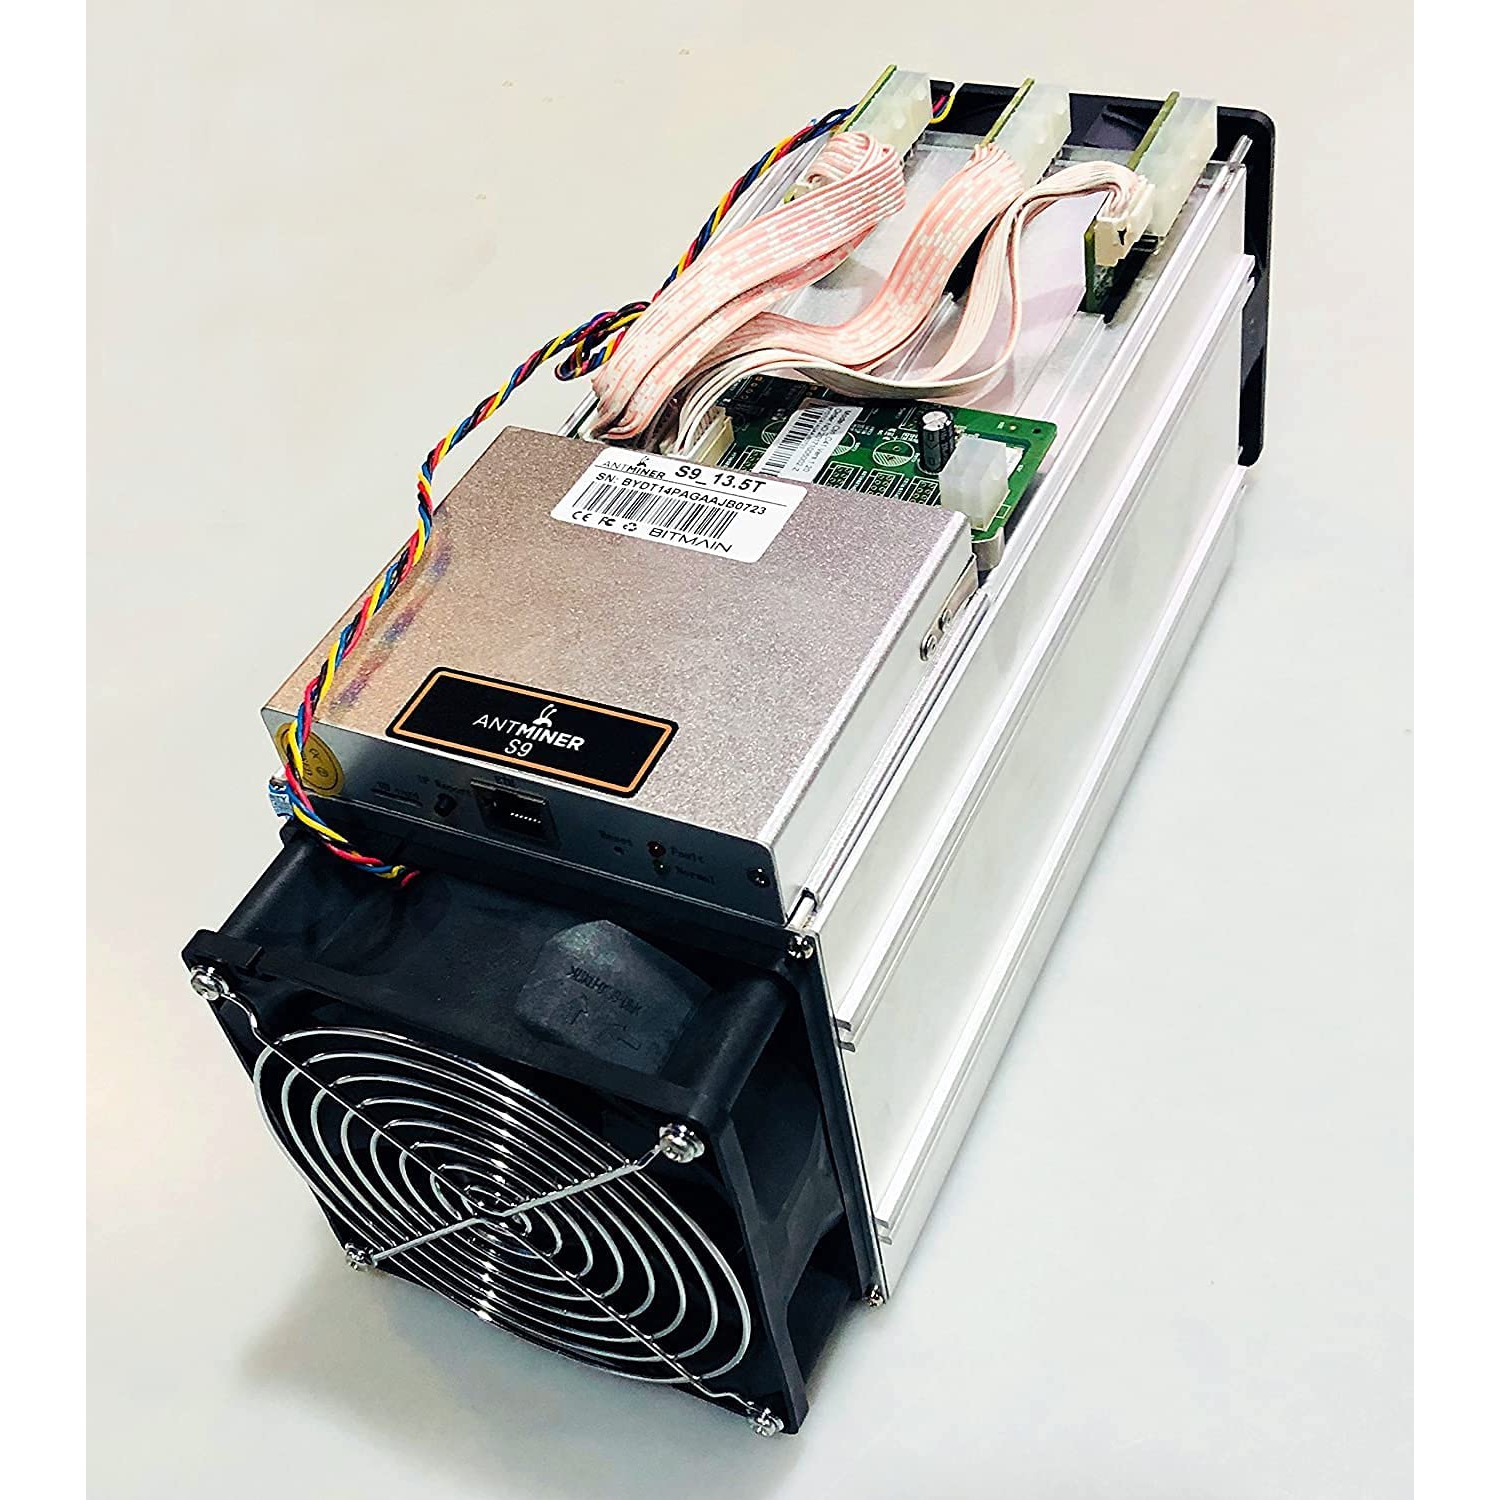 Refurbished (Good) - Bitmain Antminer S9 Bitcoin Miner, 0.098 J/GH Power Efficiency, 13.5TH/s (PSU EXCLUDED)